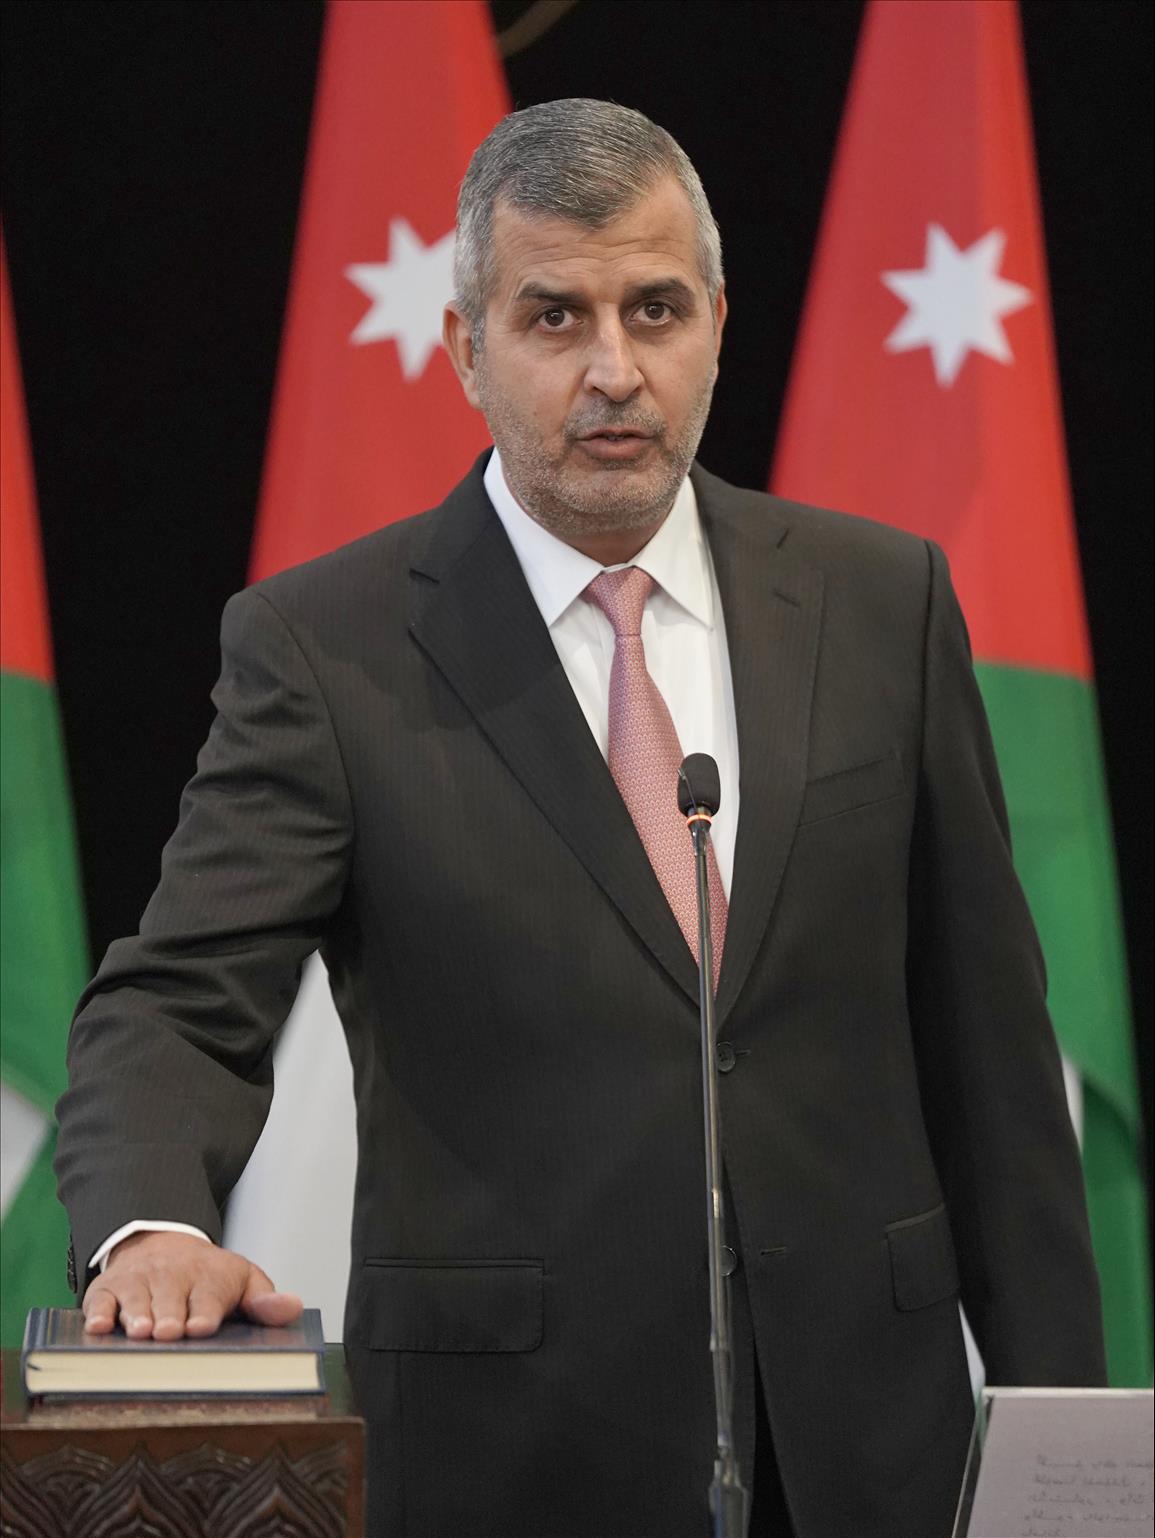 Jordan's electricity generated by renewable energy to reach 50% by 2030, says minister